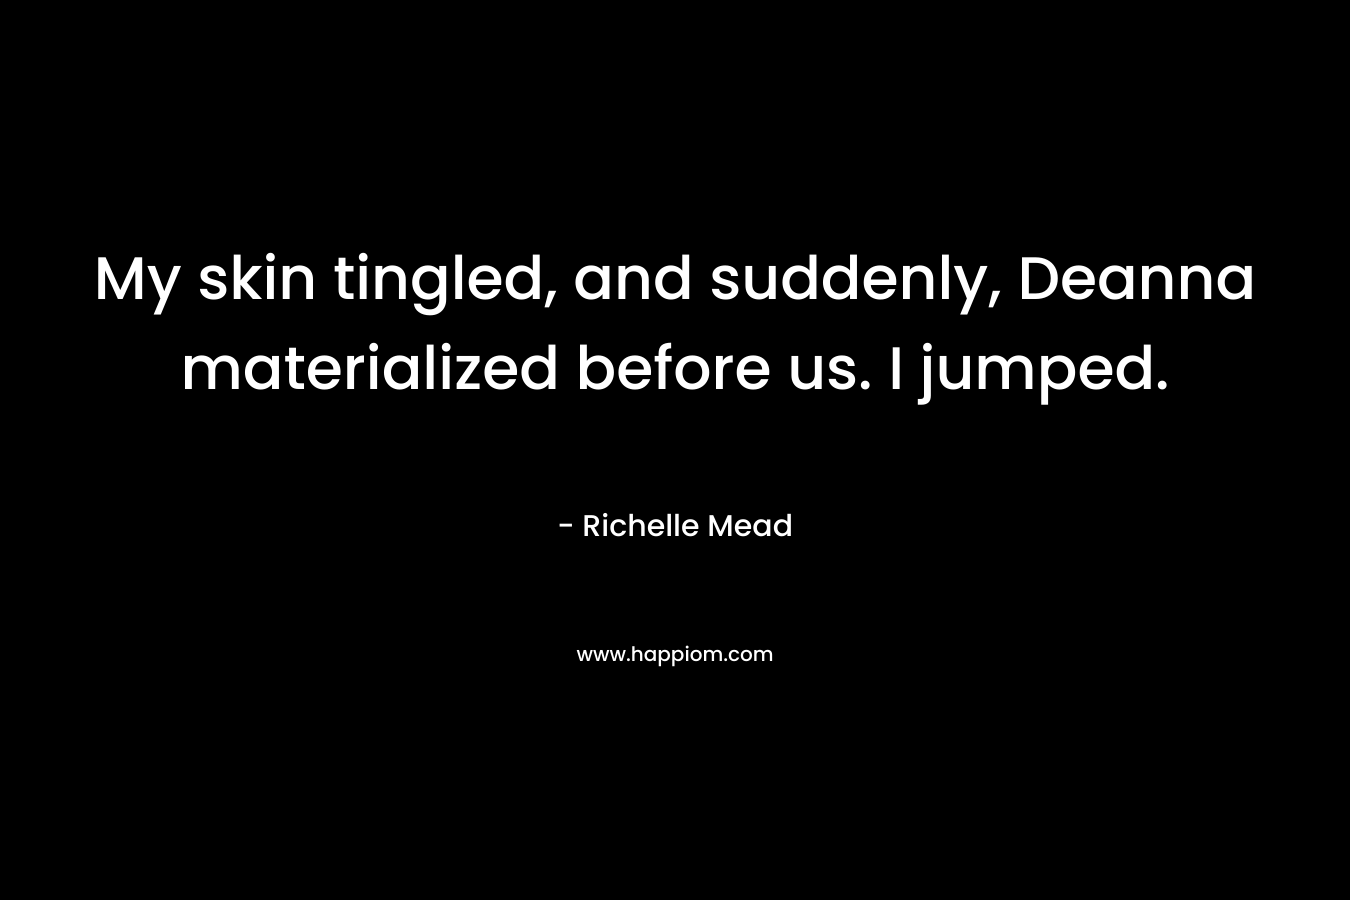 My skin tingled, and suddenly, Deanna materialized before us. I jumped. – Richelle Mead